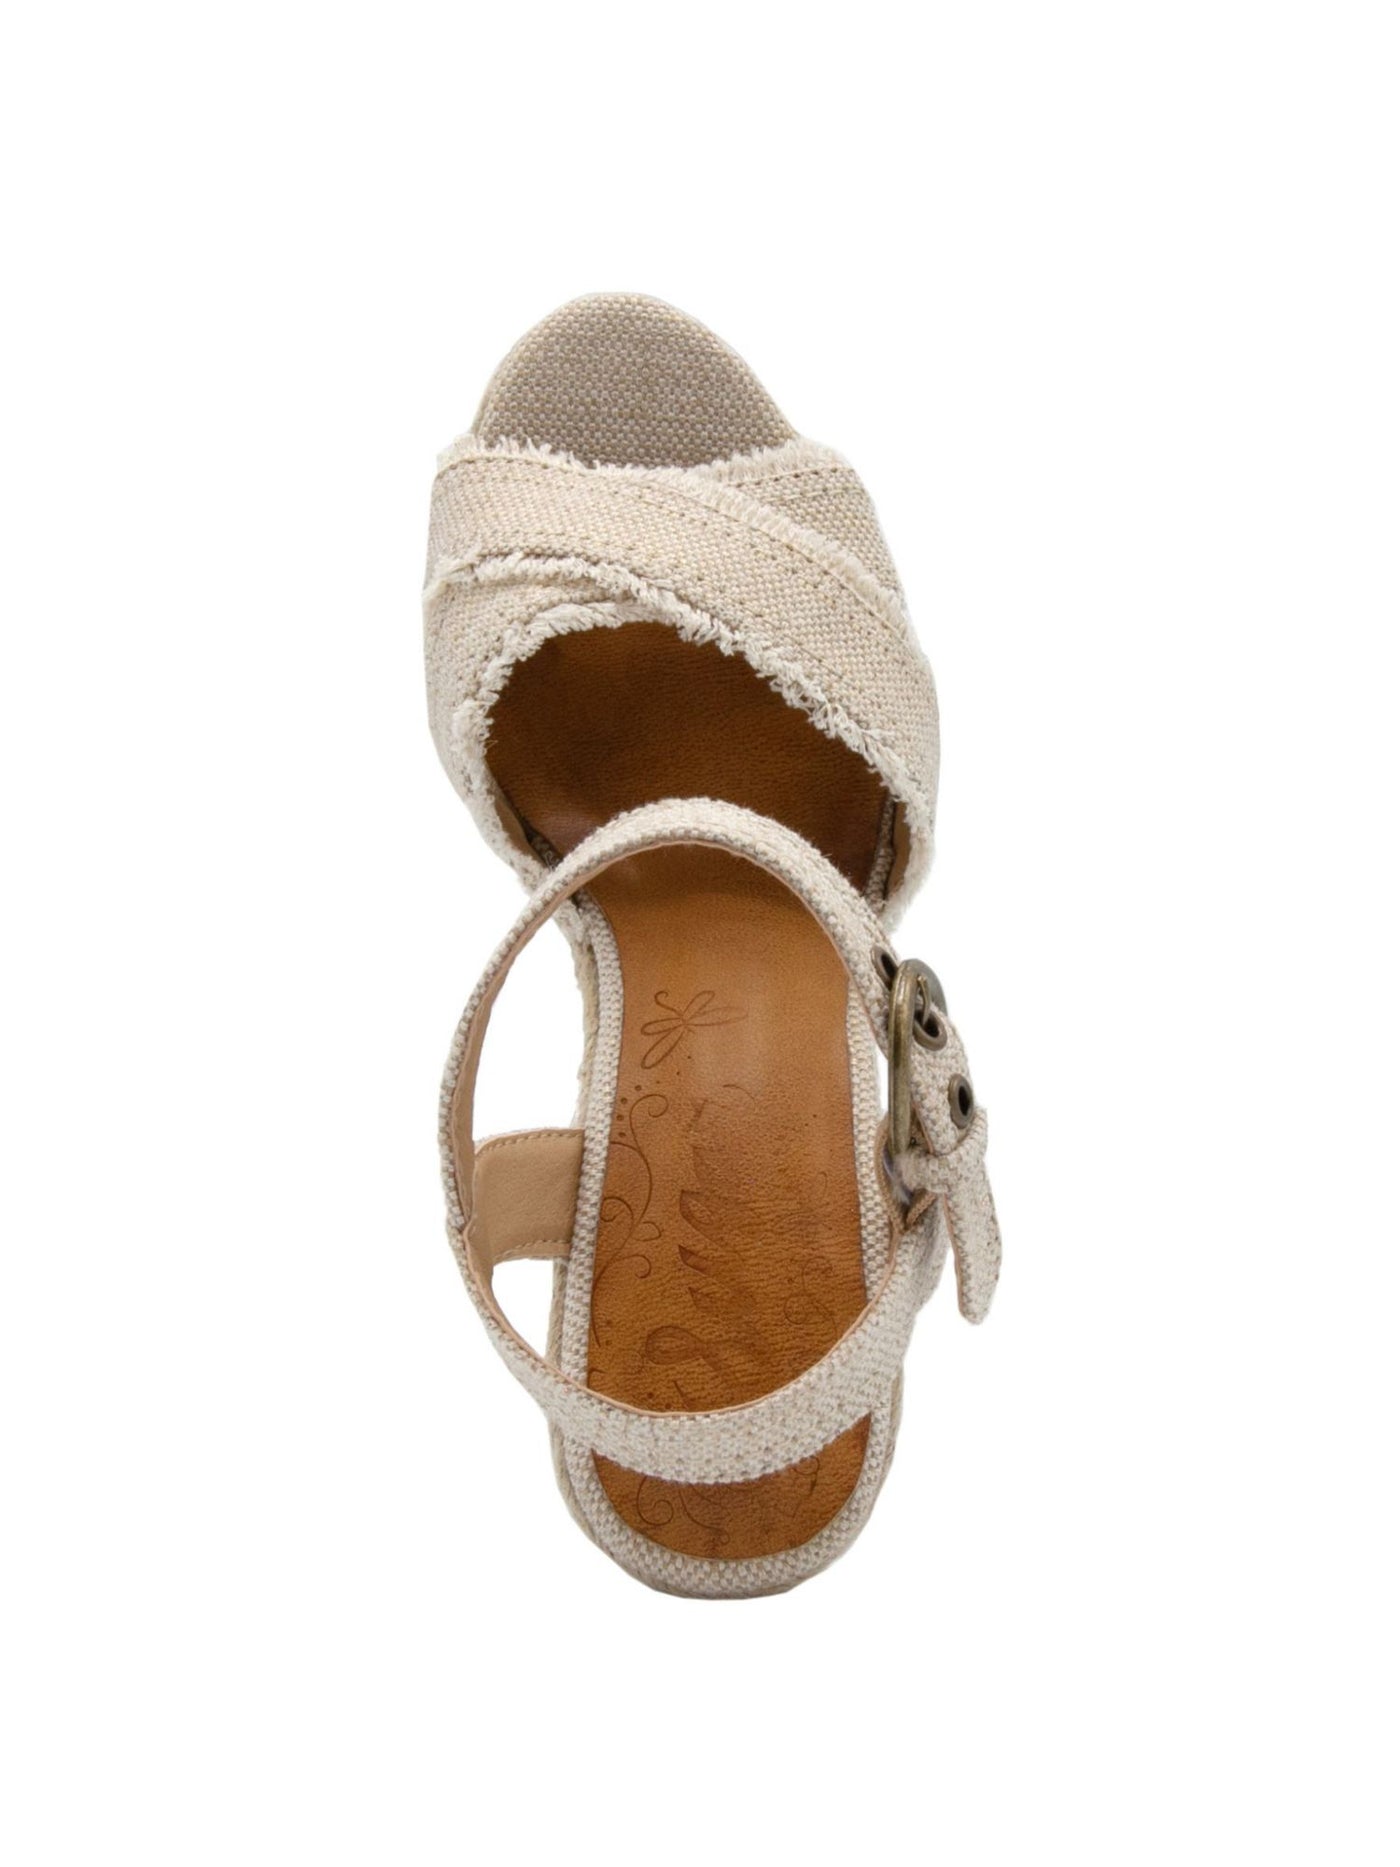 SUGAR Womens Beige Frayed Padded Jute Adjustable Strap Woven Fave Round Toe Wedge Buckle Espadrille Shoes 9 M